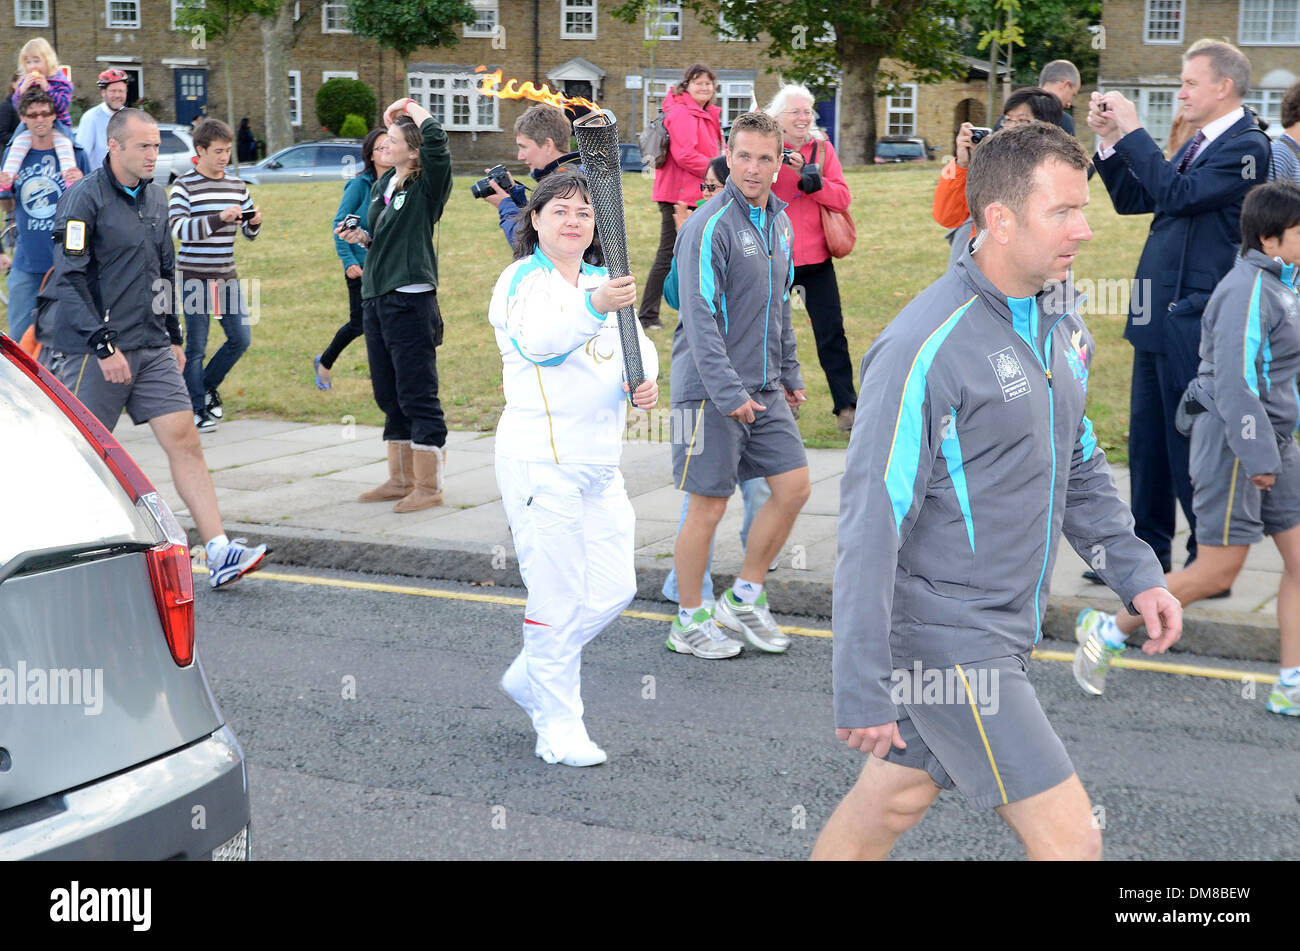 Torchbearers with the Paralympic flame on The Isle Of Dogs. London, England - 29.08.12 Stock Photo